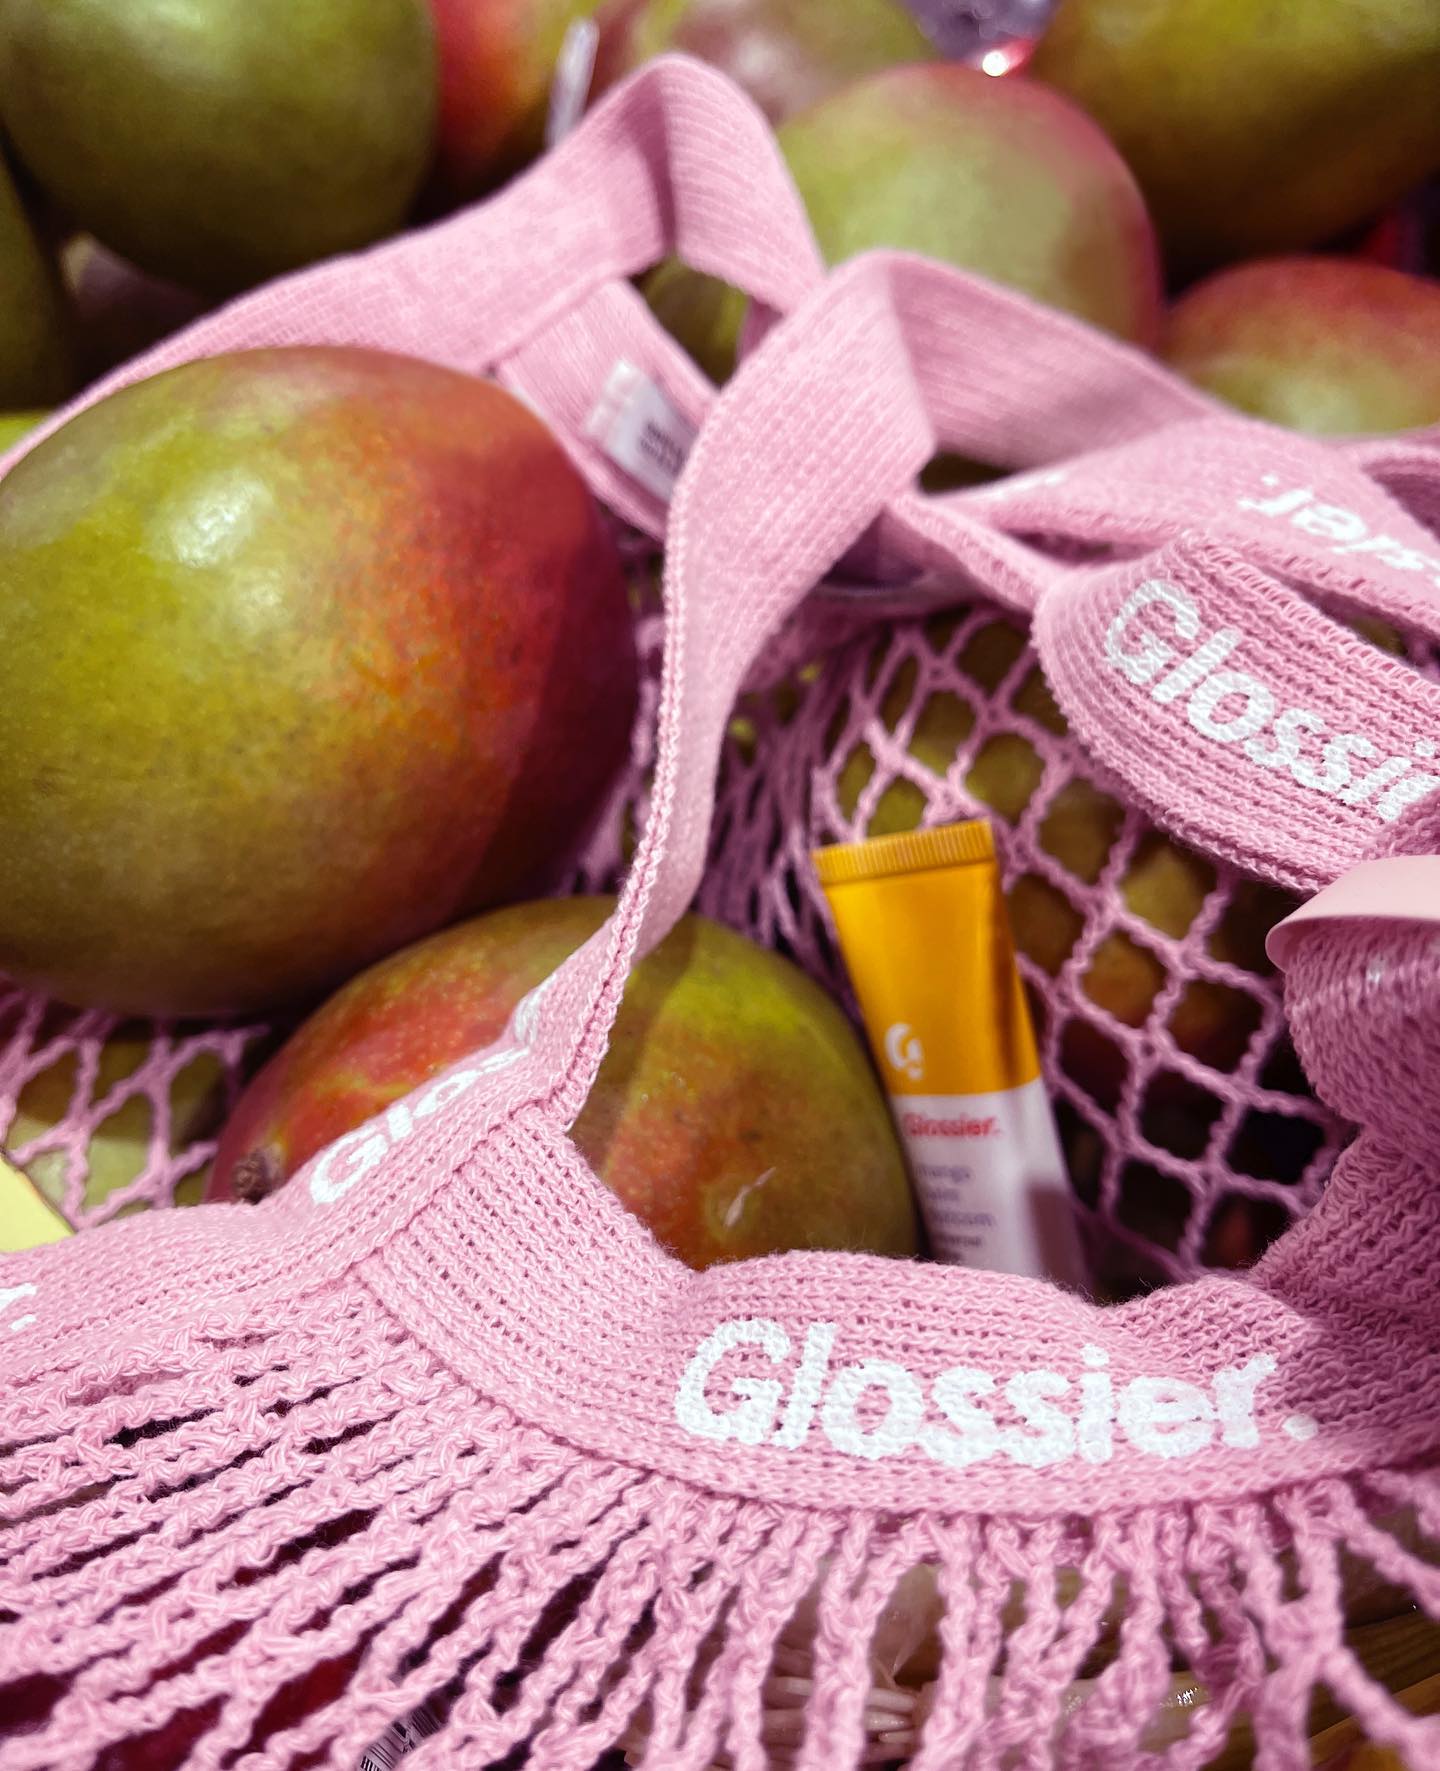 Mangos and Glossier lip products rest on a light pink Glossier branded fruit bag.